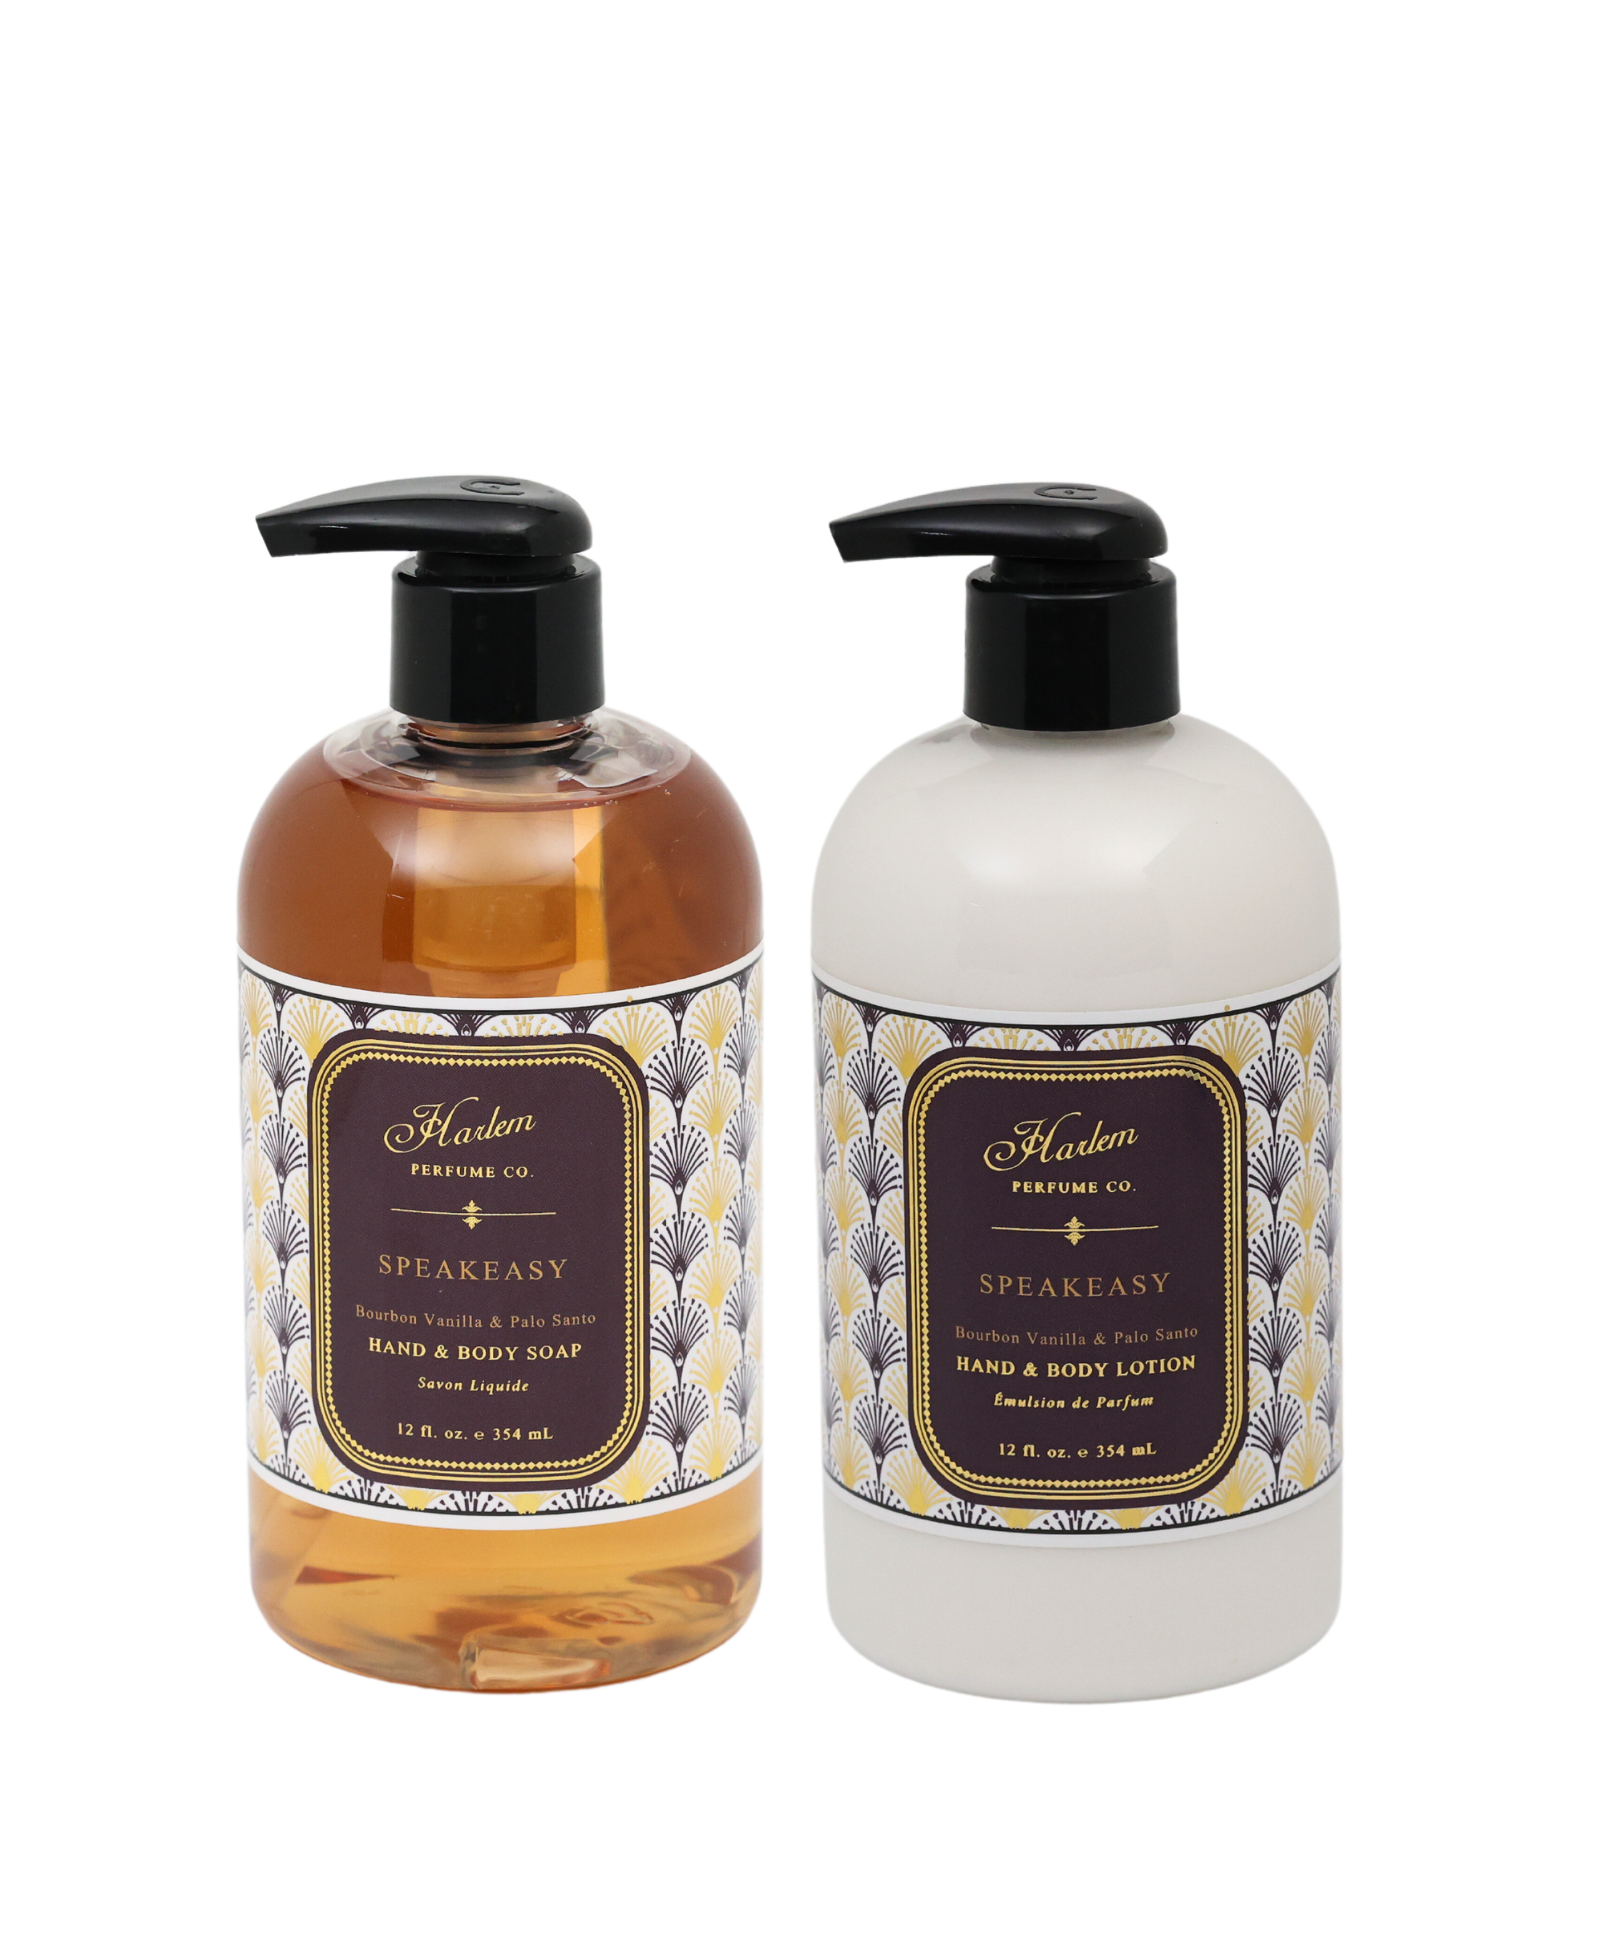 This is an image of our Speakeasy Soap and Lotion in a clear PET plastic bottle with decorative labels with a wrap around Art Deco pattern.